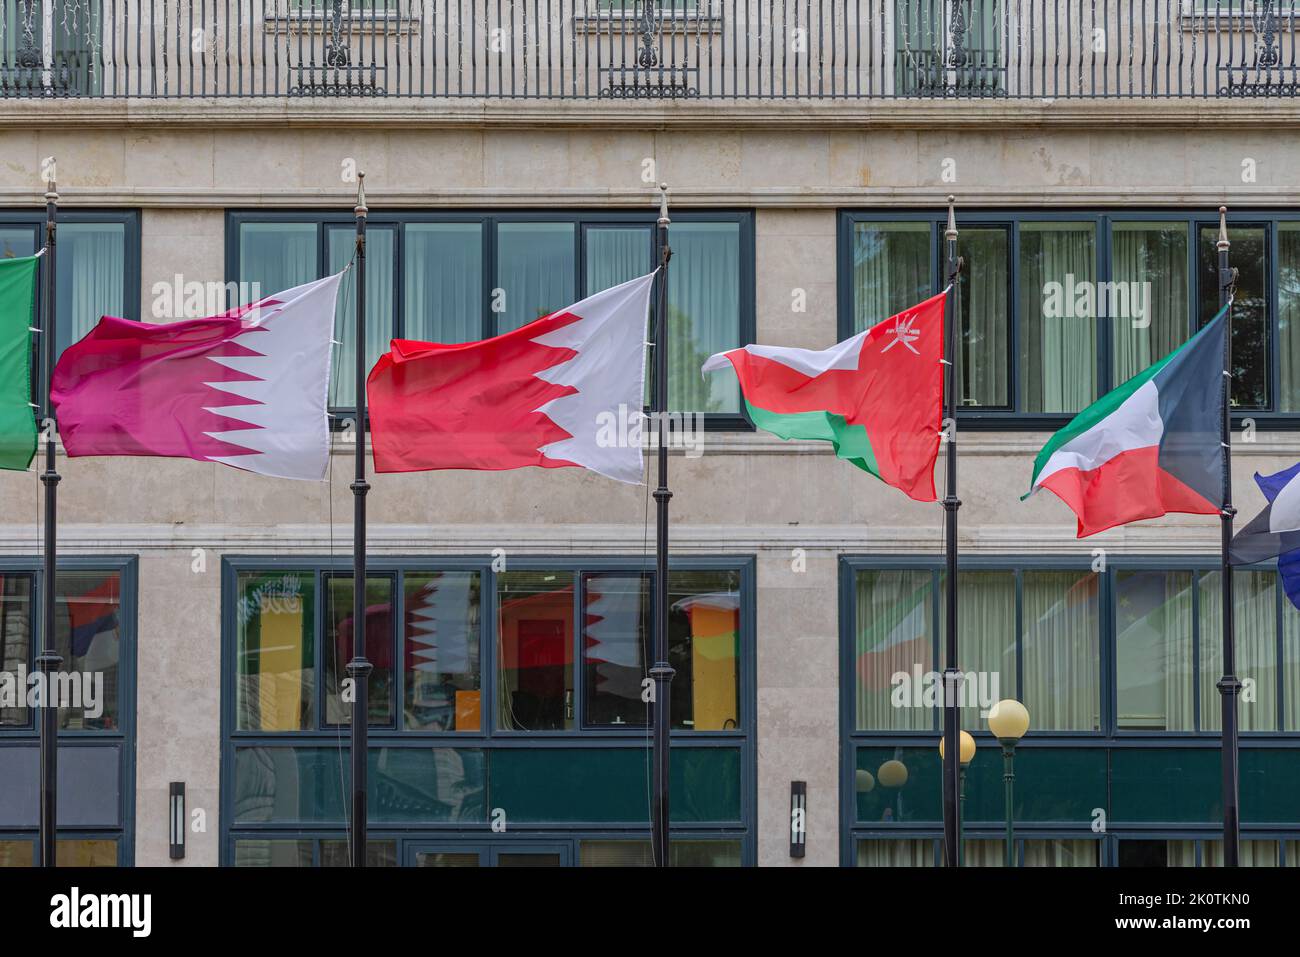 Qatar Bahrain Oman Kuwait Flags in Front of Hotel Building Stock Photo